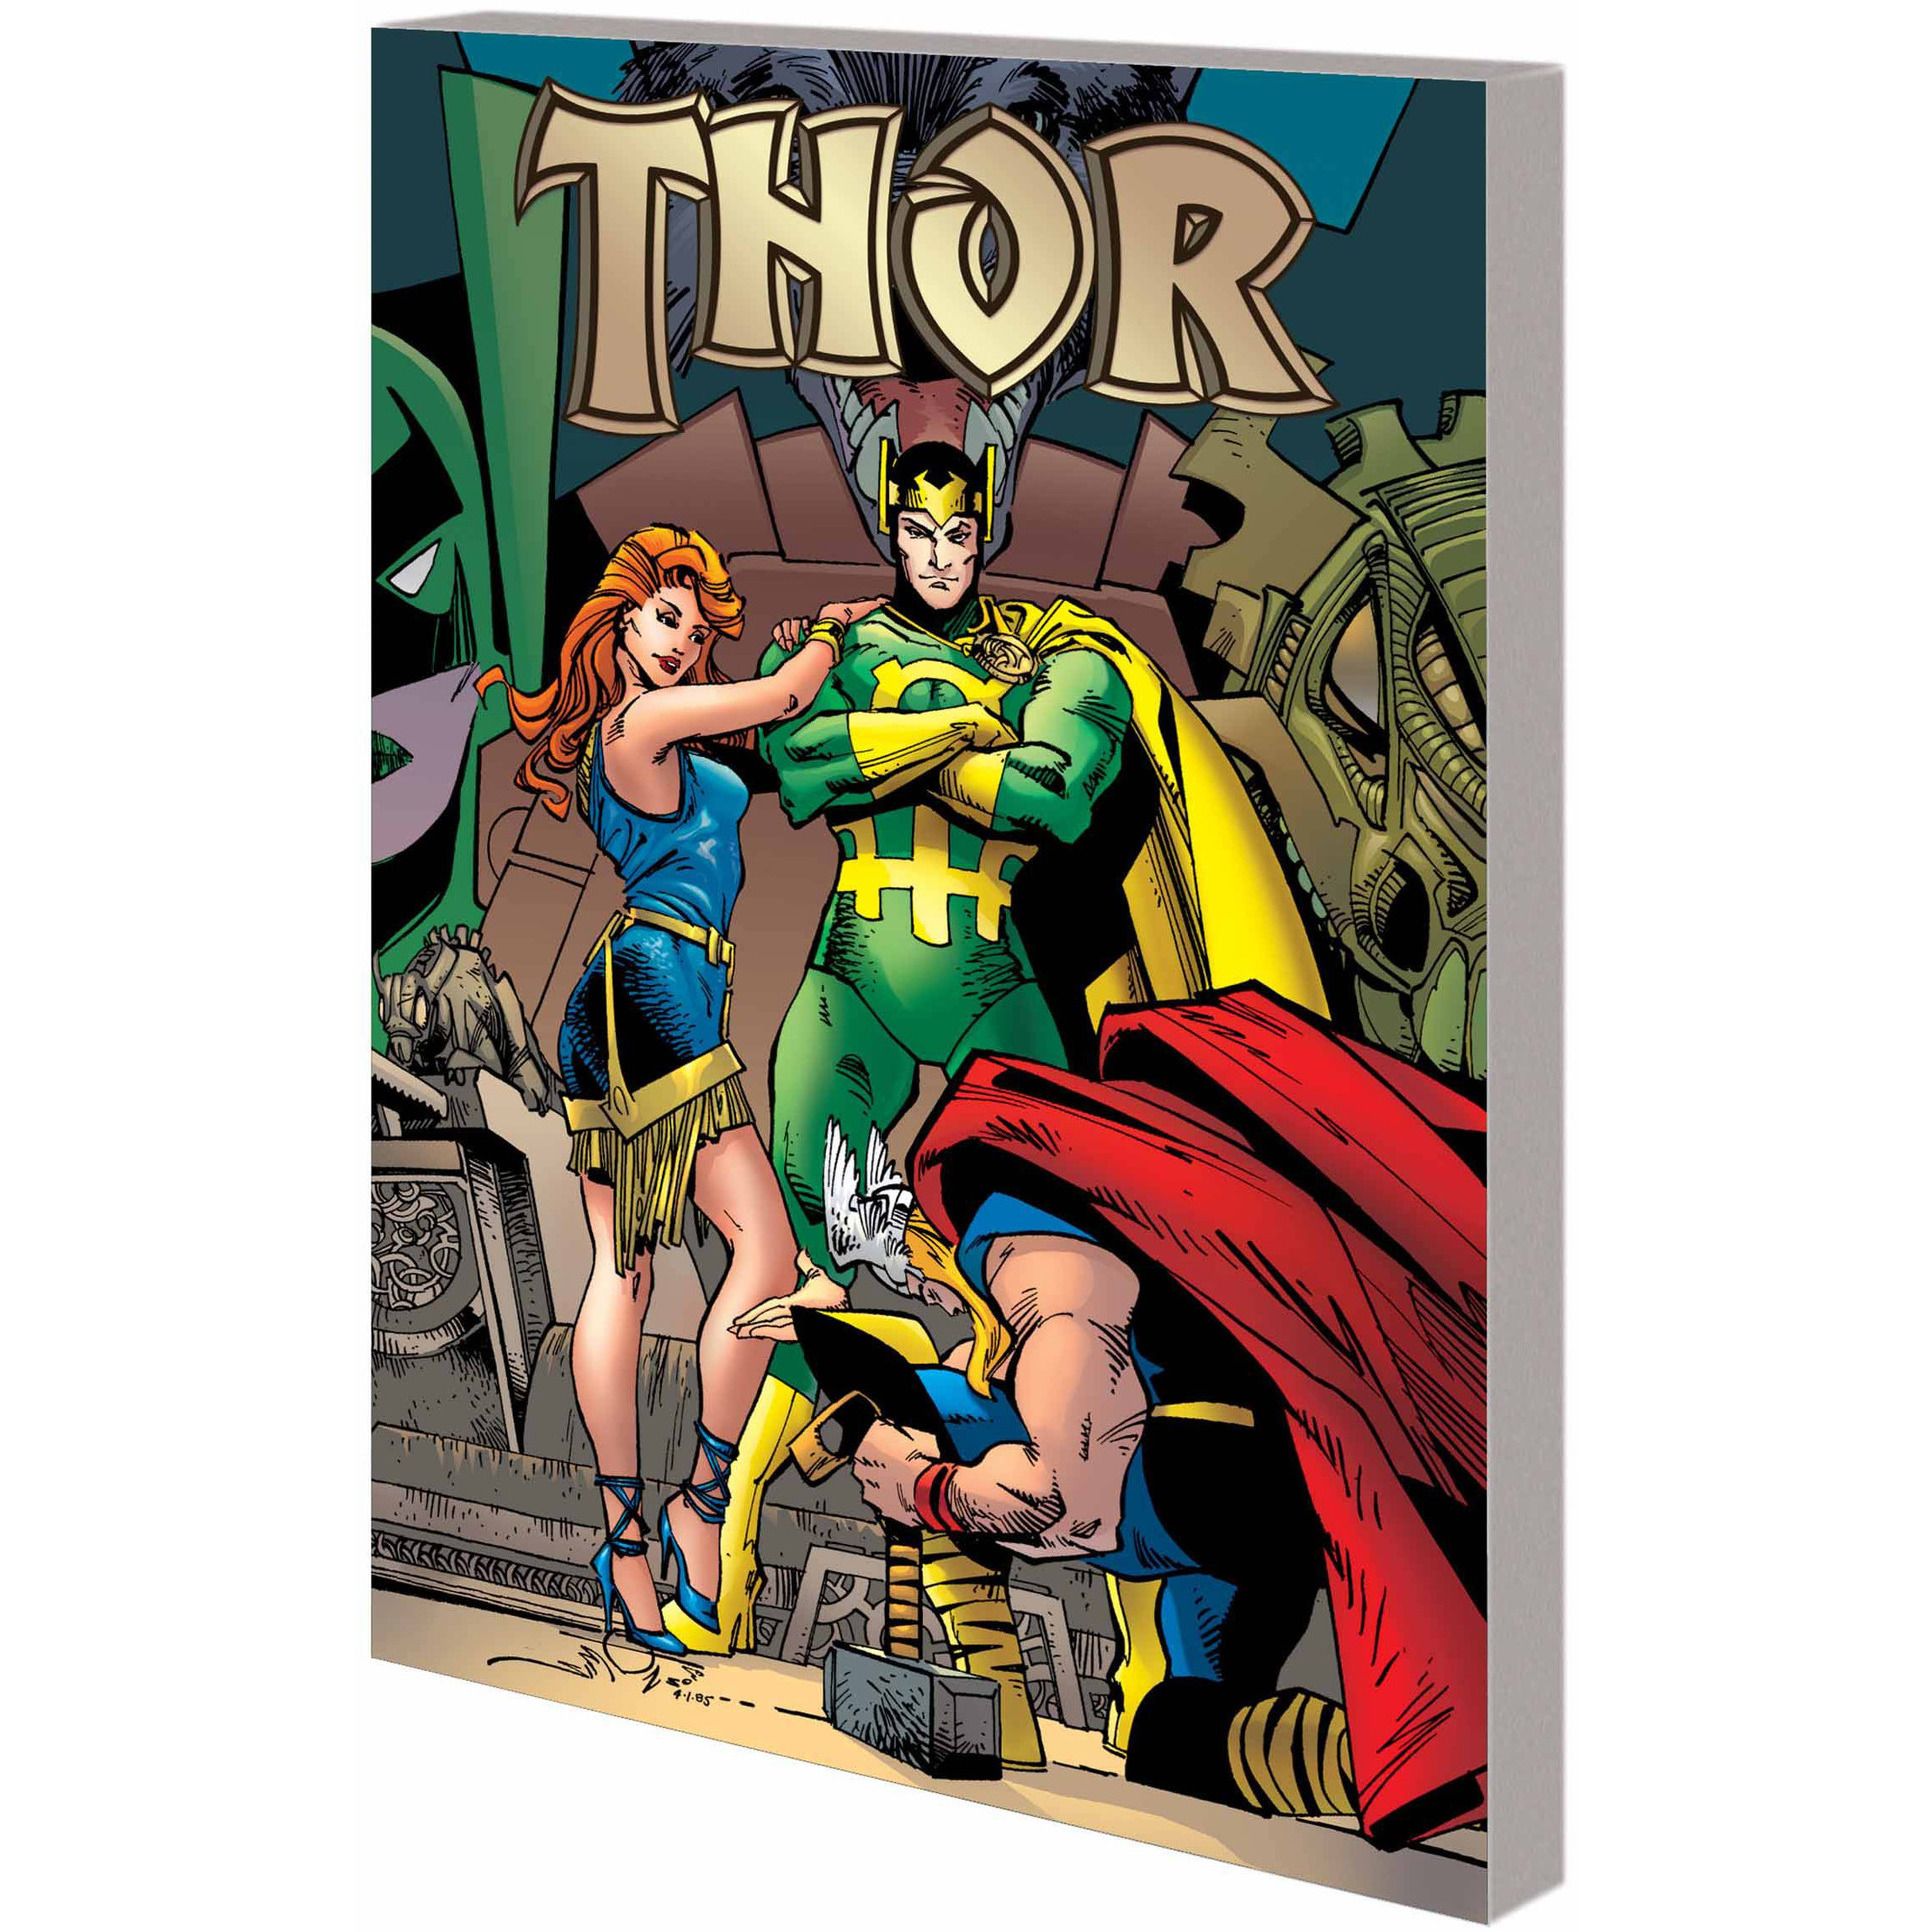  The Mighty Thor by Simonson Vol. 3 TP Uncanny!